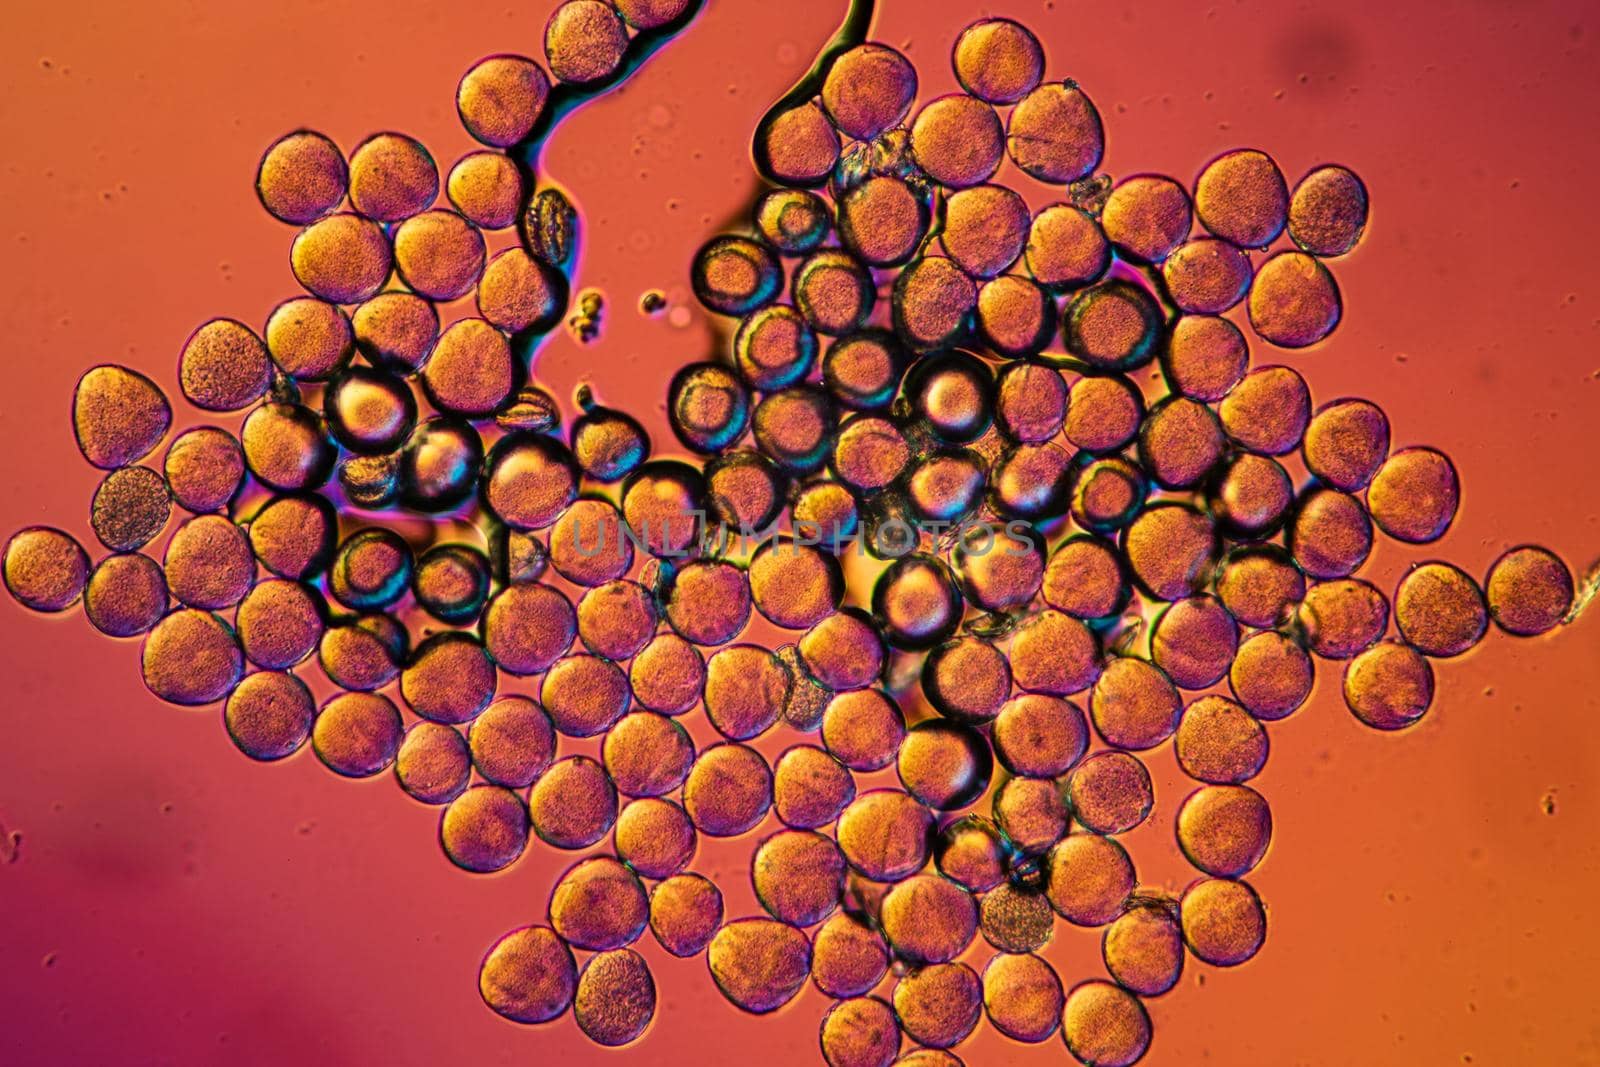 Apple pollen from a blossom in spring under the microscope